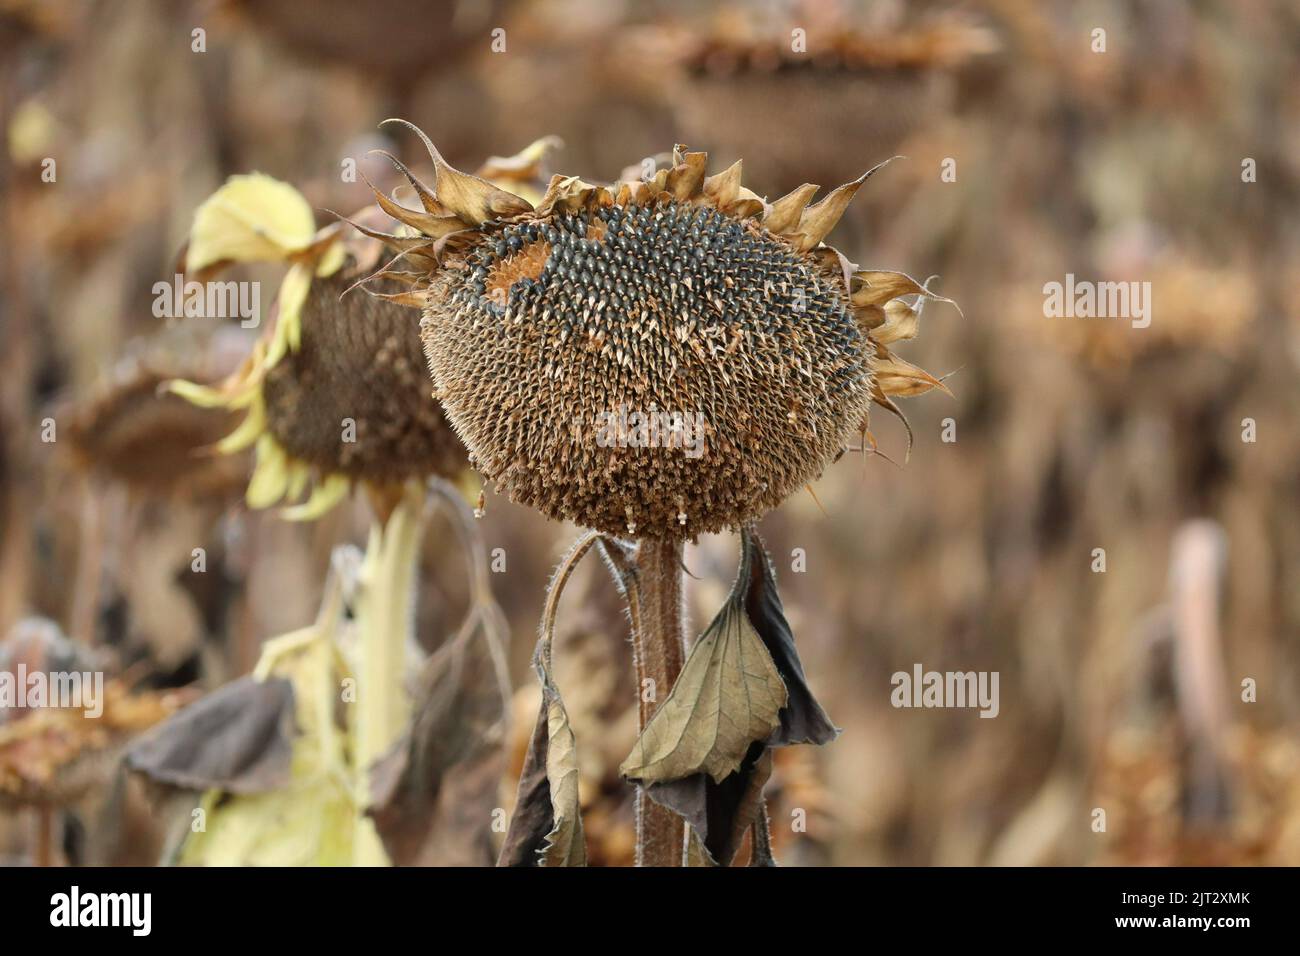 Sunflower seeds presumably picked out by Birds Stock Photo